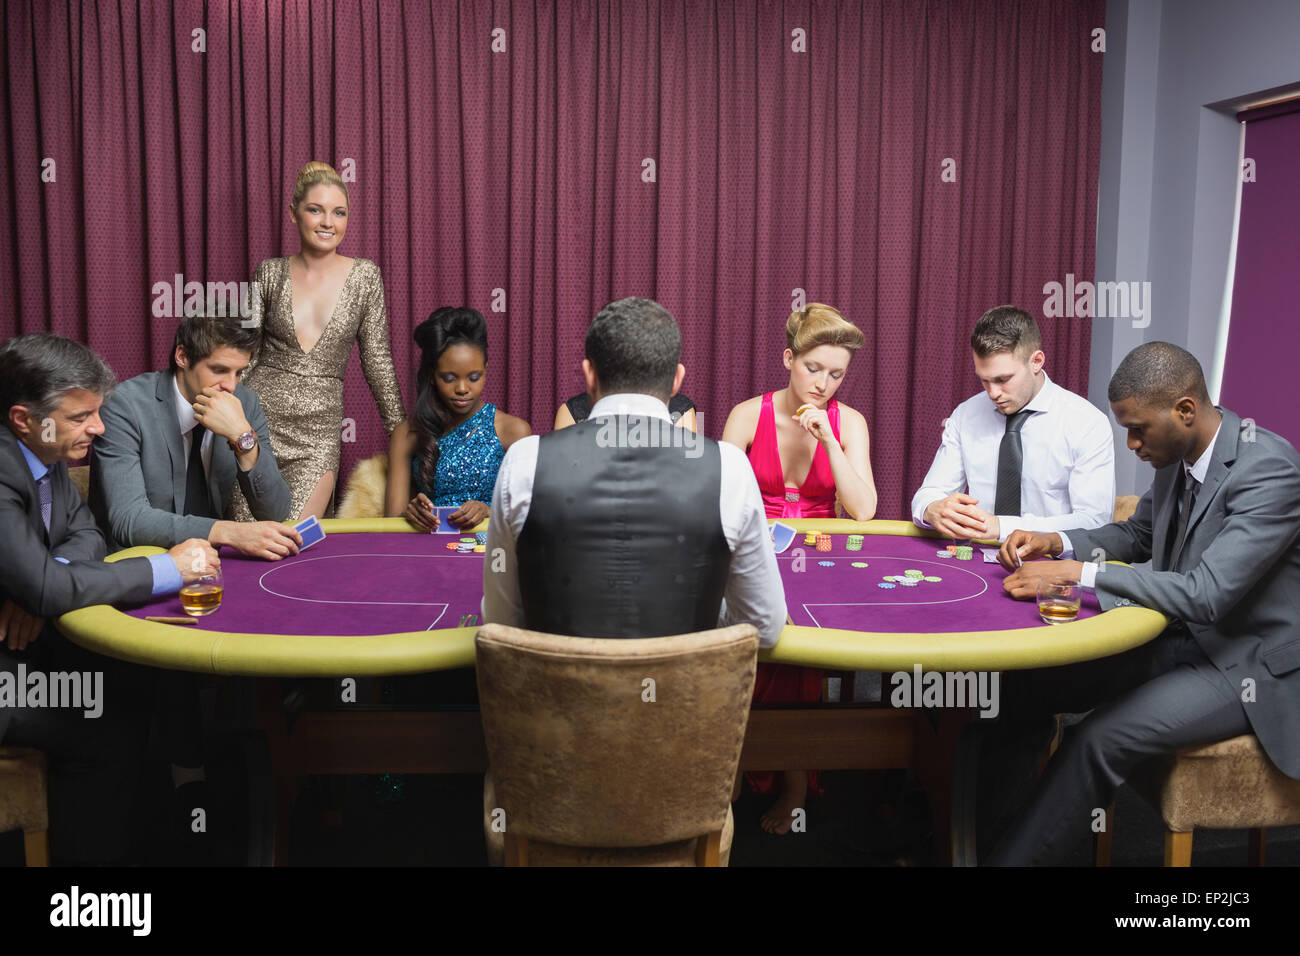 People sitting at the casino table with woman standing Stock Photo